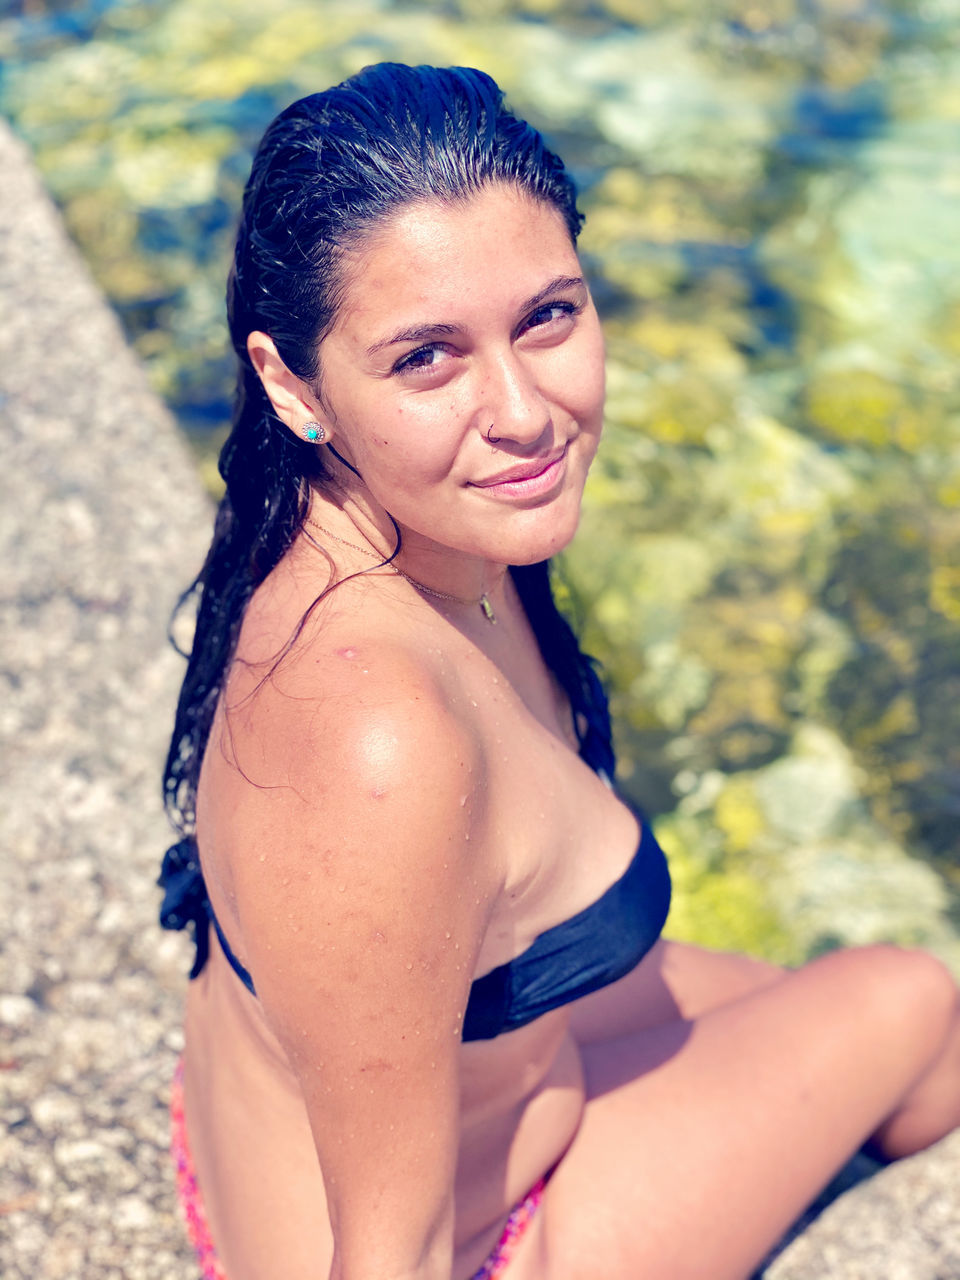 women, one person, adult, portrait, clothing, swimwear, smiling, young adult, bikini, looking at camera, summer, happiness, nature, hairstyle, water, lifestyles, female, emotion, relaxation, leisure activity, trip, black hair, vacation, photo shoot, land, holiday, sunlight, person, human hair, long hair, human leg, outdoors, day, fashion, cheerful, beach, limb, three quarter length, swimsuit top, brown hair, enjoyment, sun, focus on foreground, teeth, sitting, smile, swimming, undergarment, wet, child